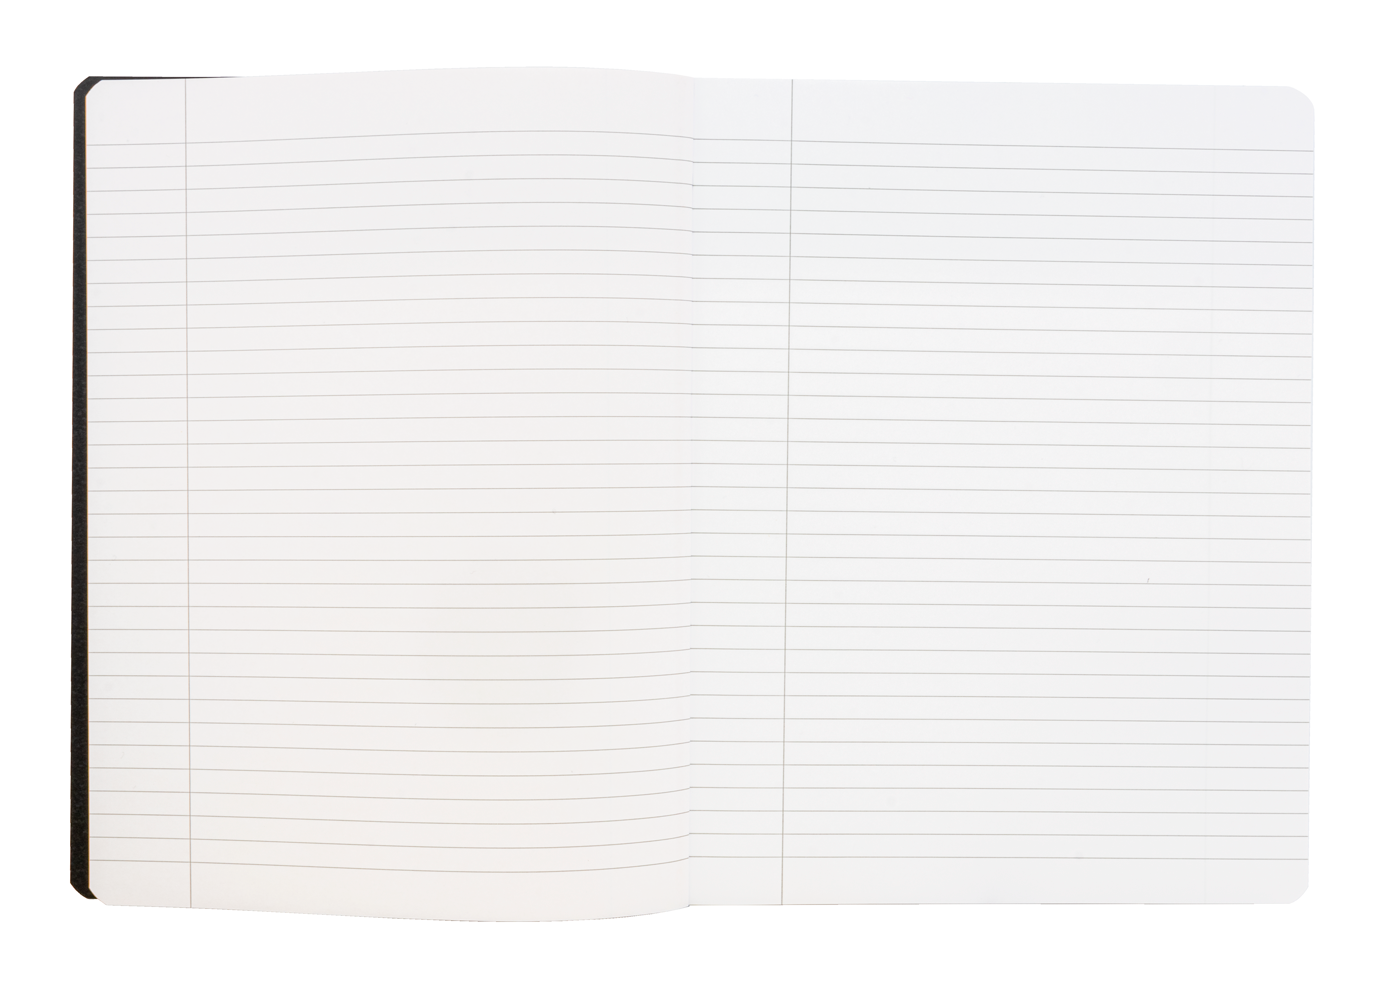 Rhodia Composition Notebook Black - Lined